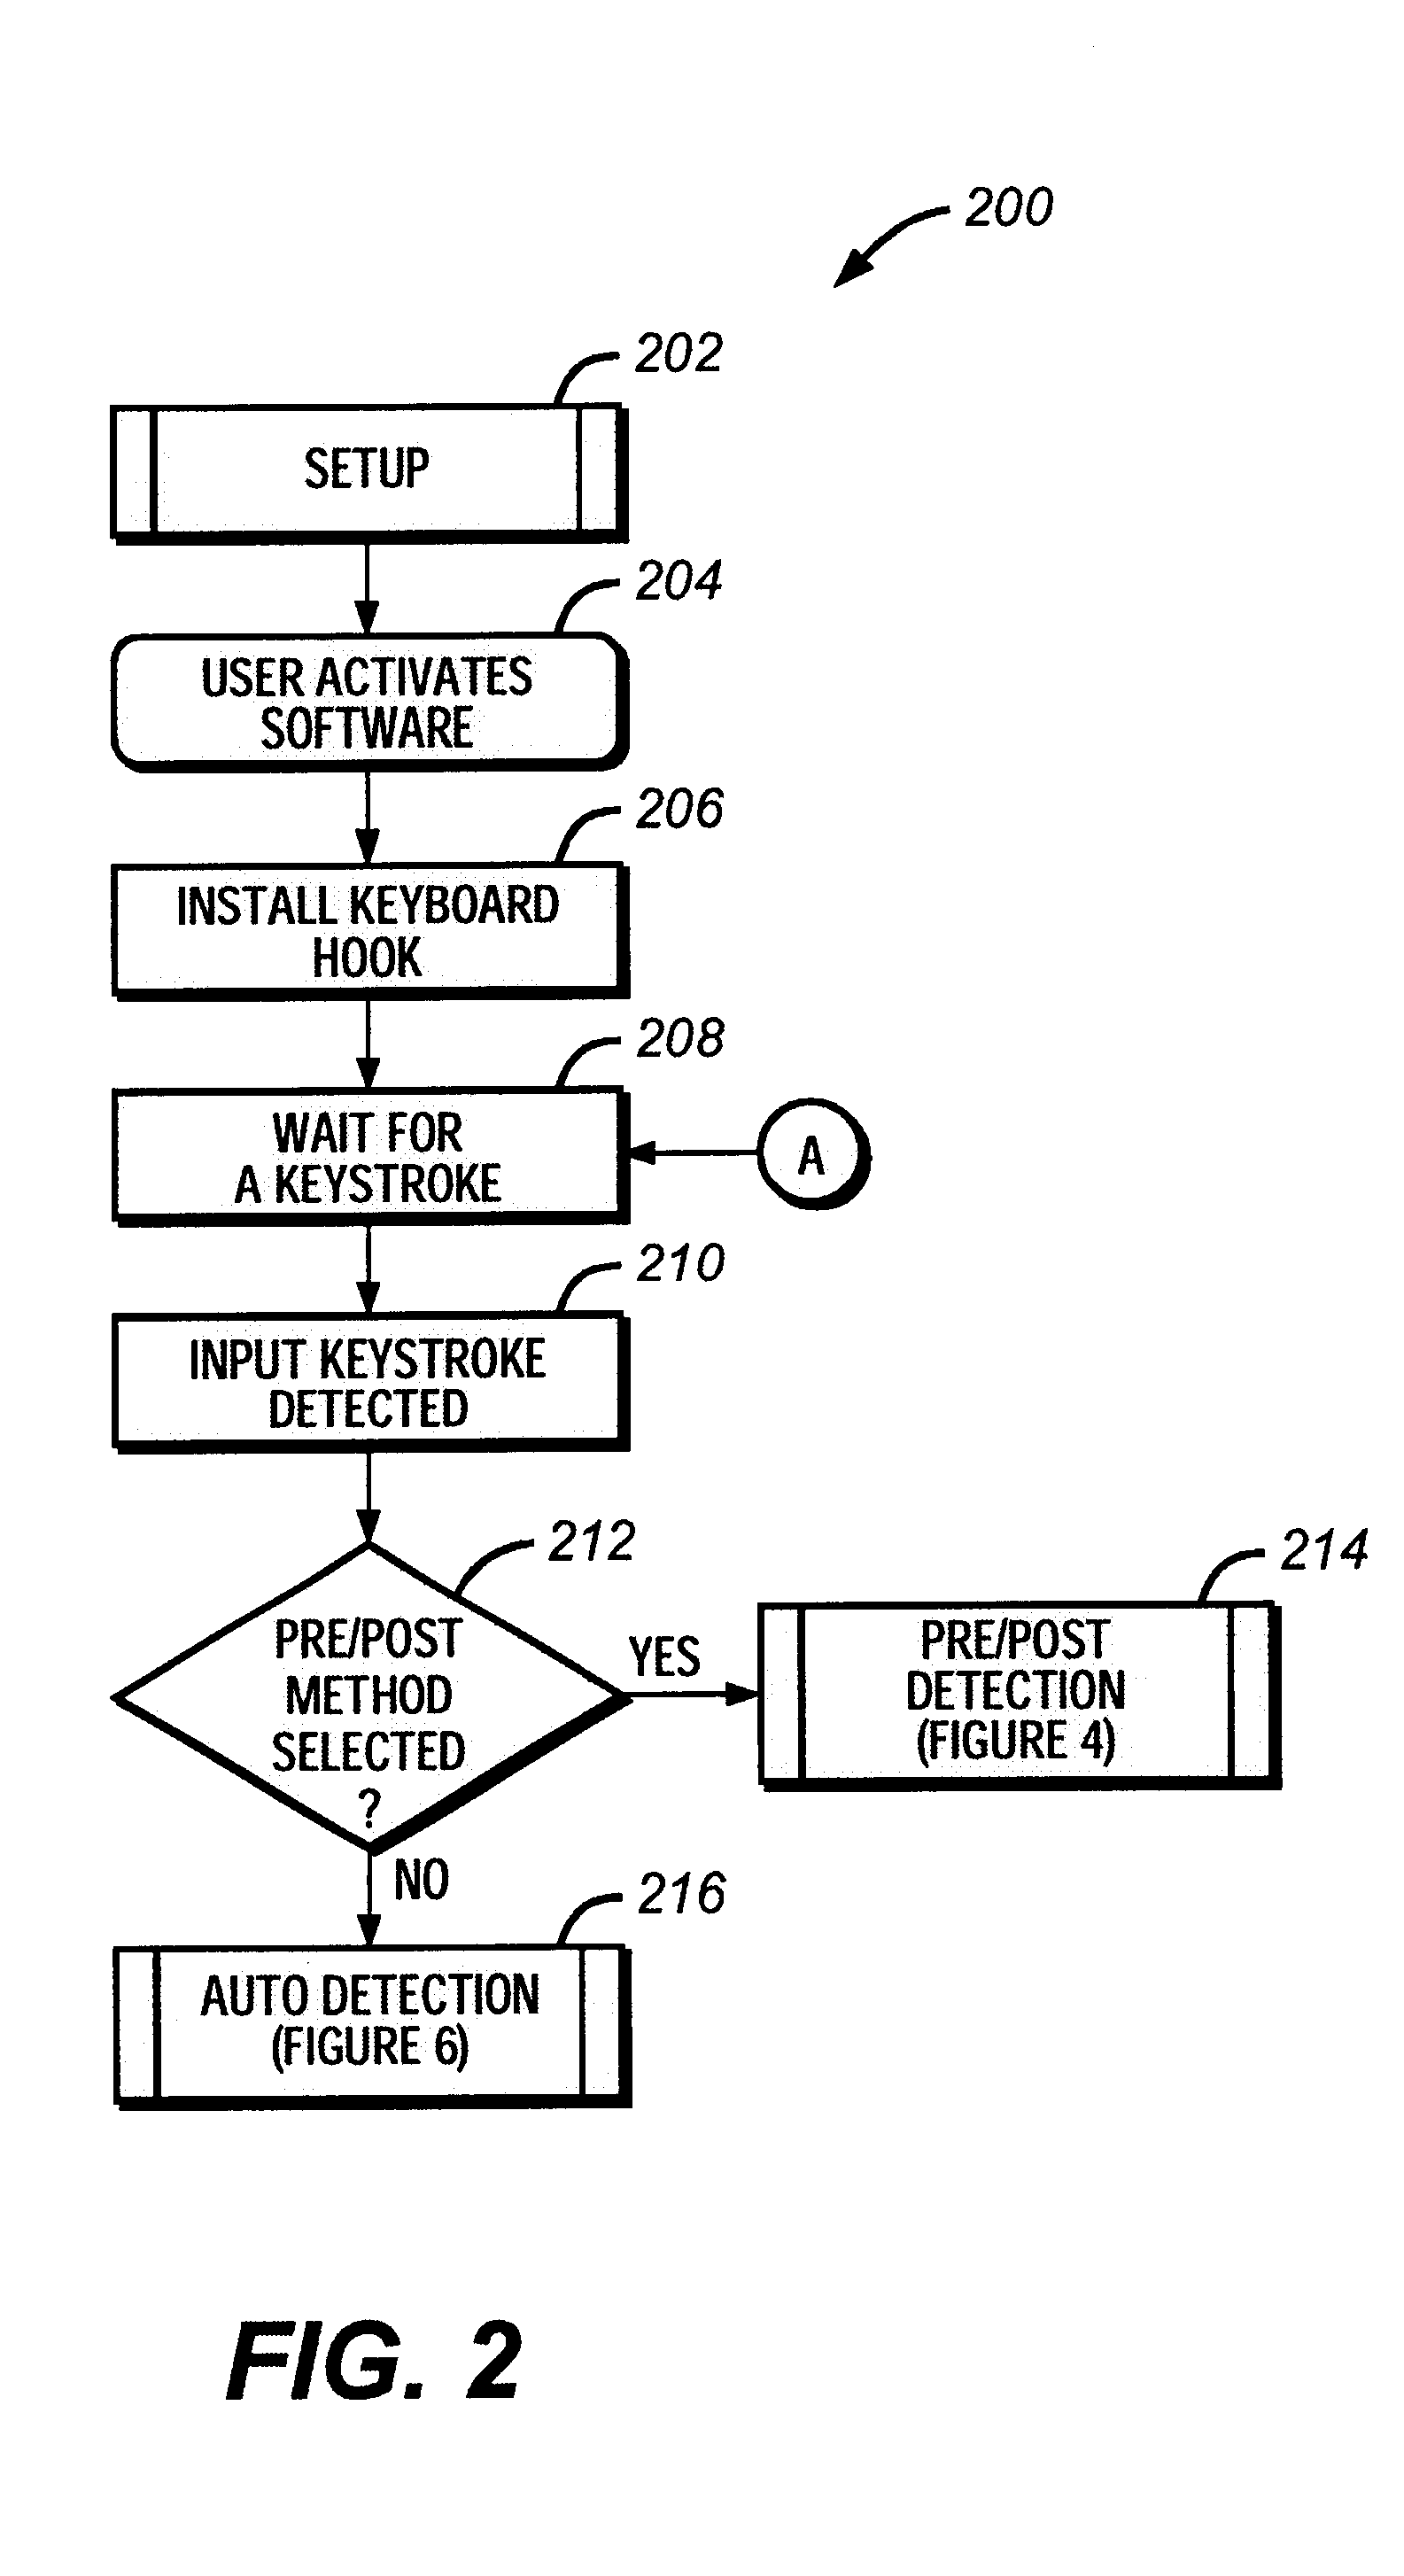 Keyboard wedge system configured for data processing over a keyboard hook